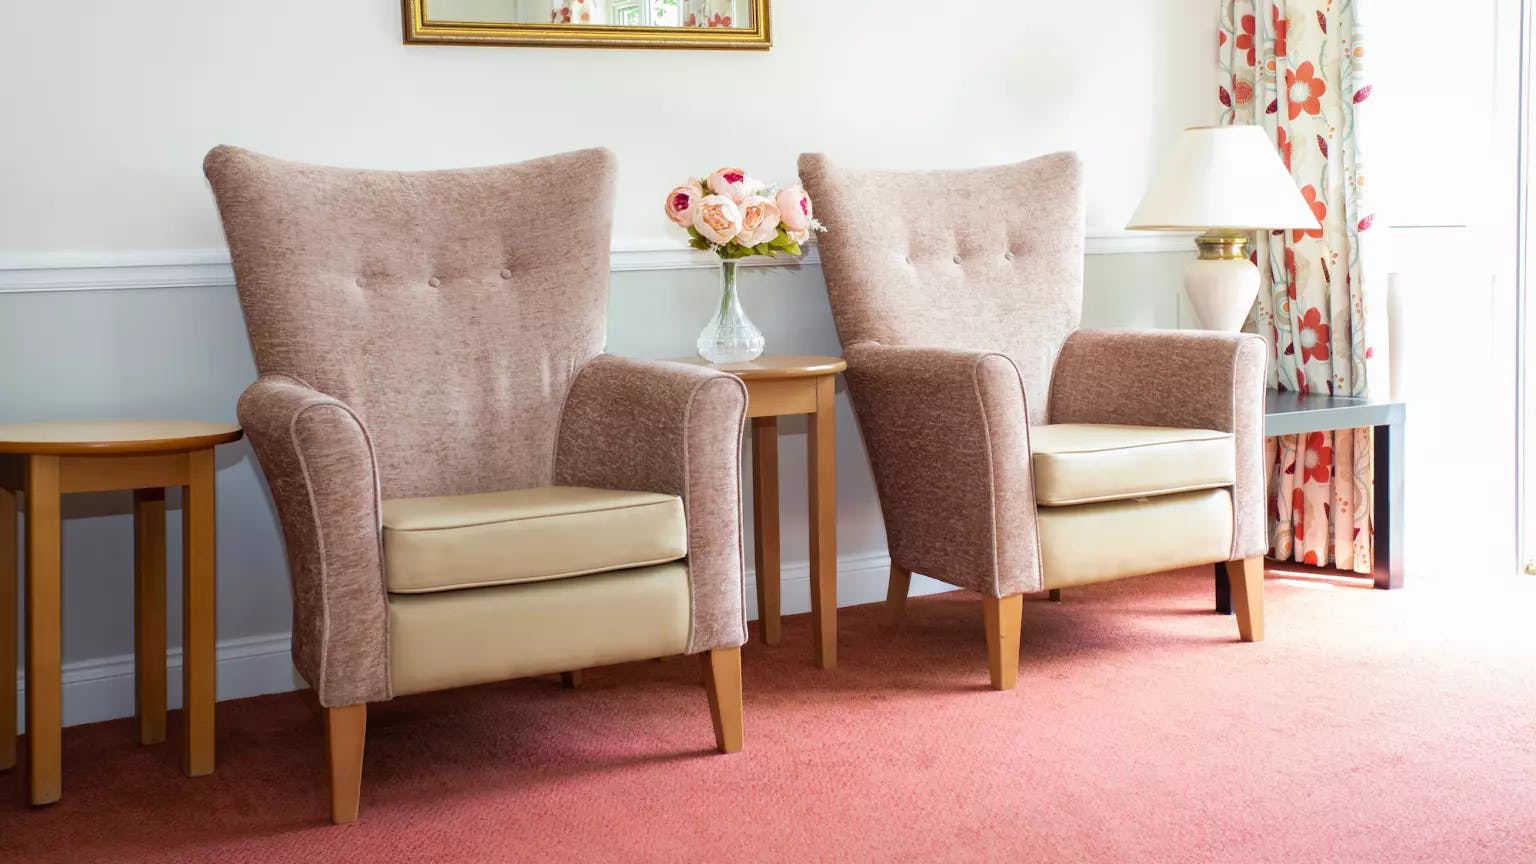 Seating area of Vesta Lodge care home in St Albans, Hertfordshire